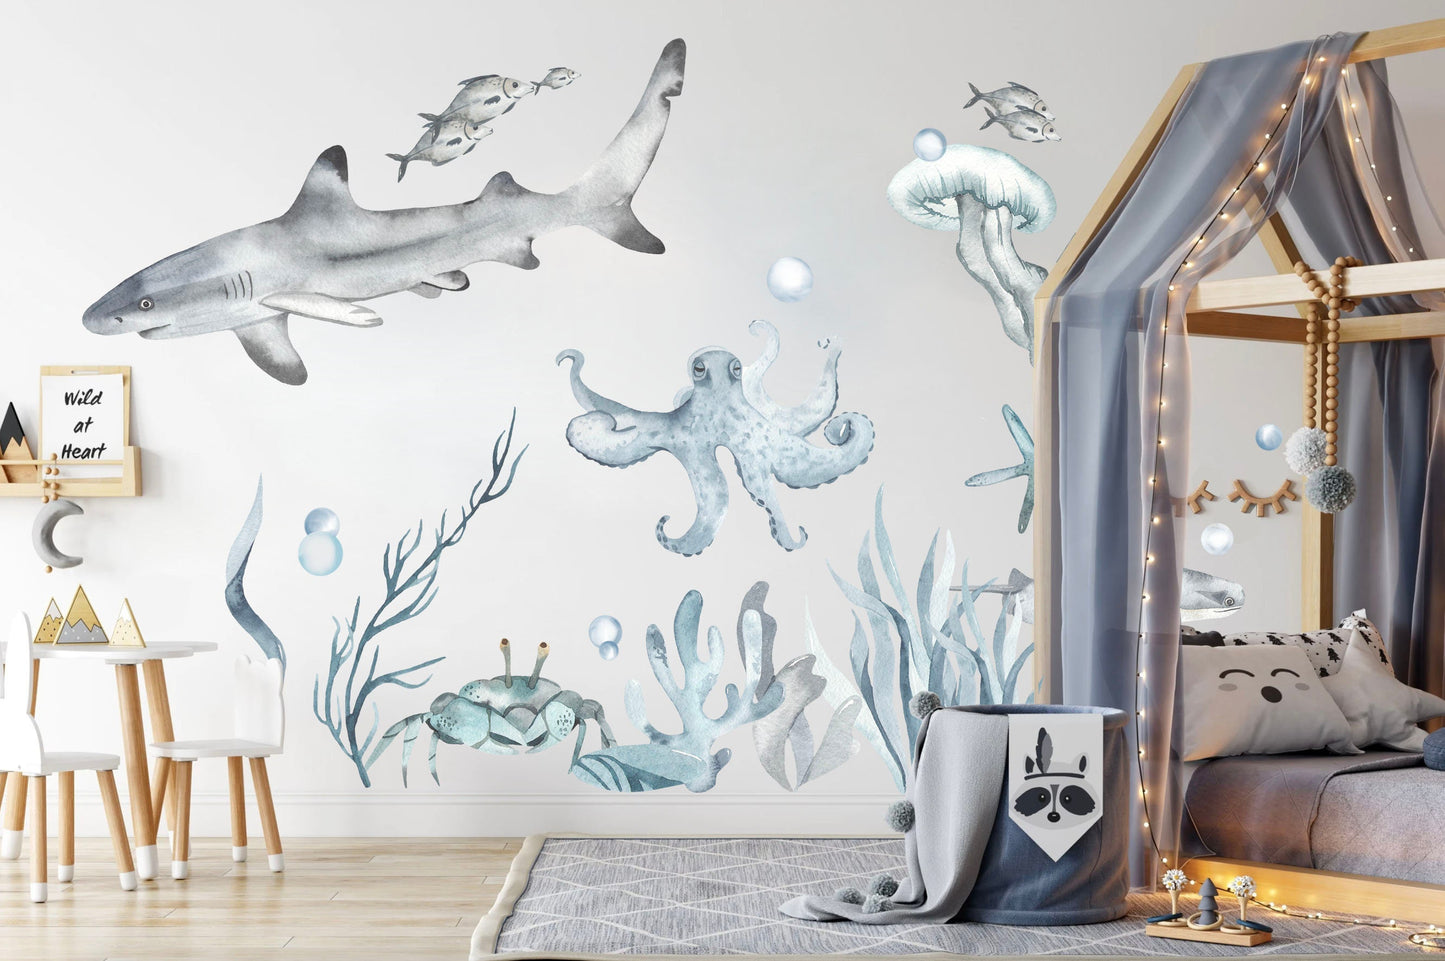 Blue Grey Underwater World Wall Decal - Shark Crab Octopus Jelly Fish - BR033